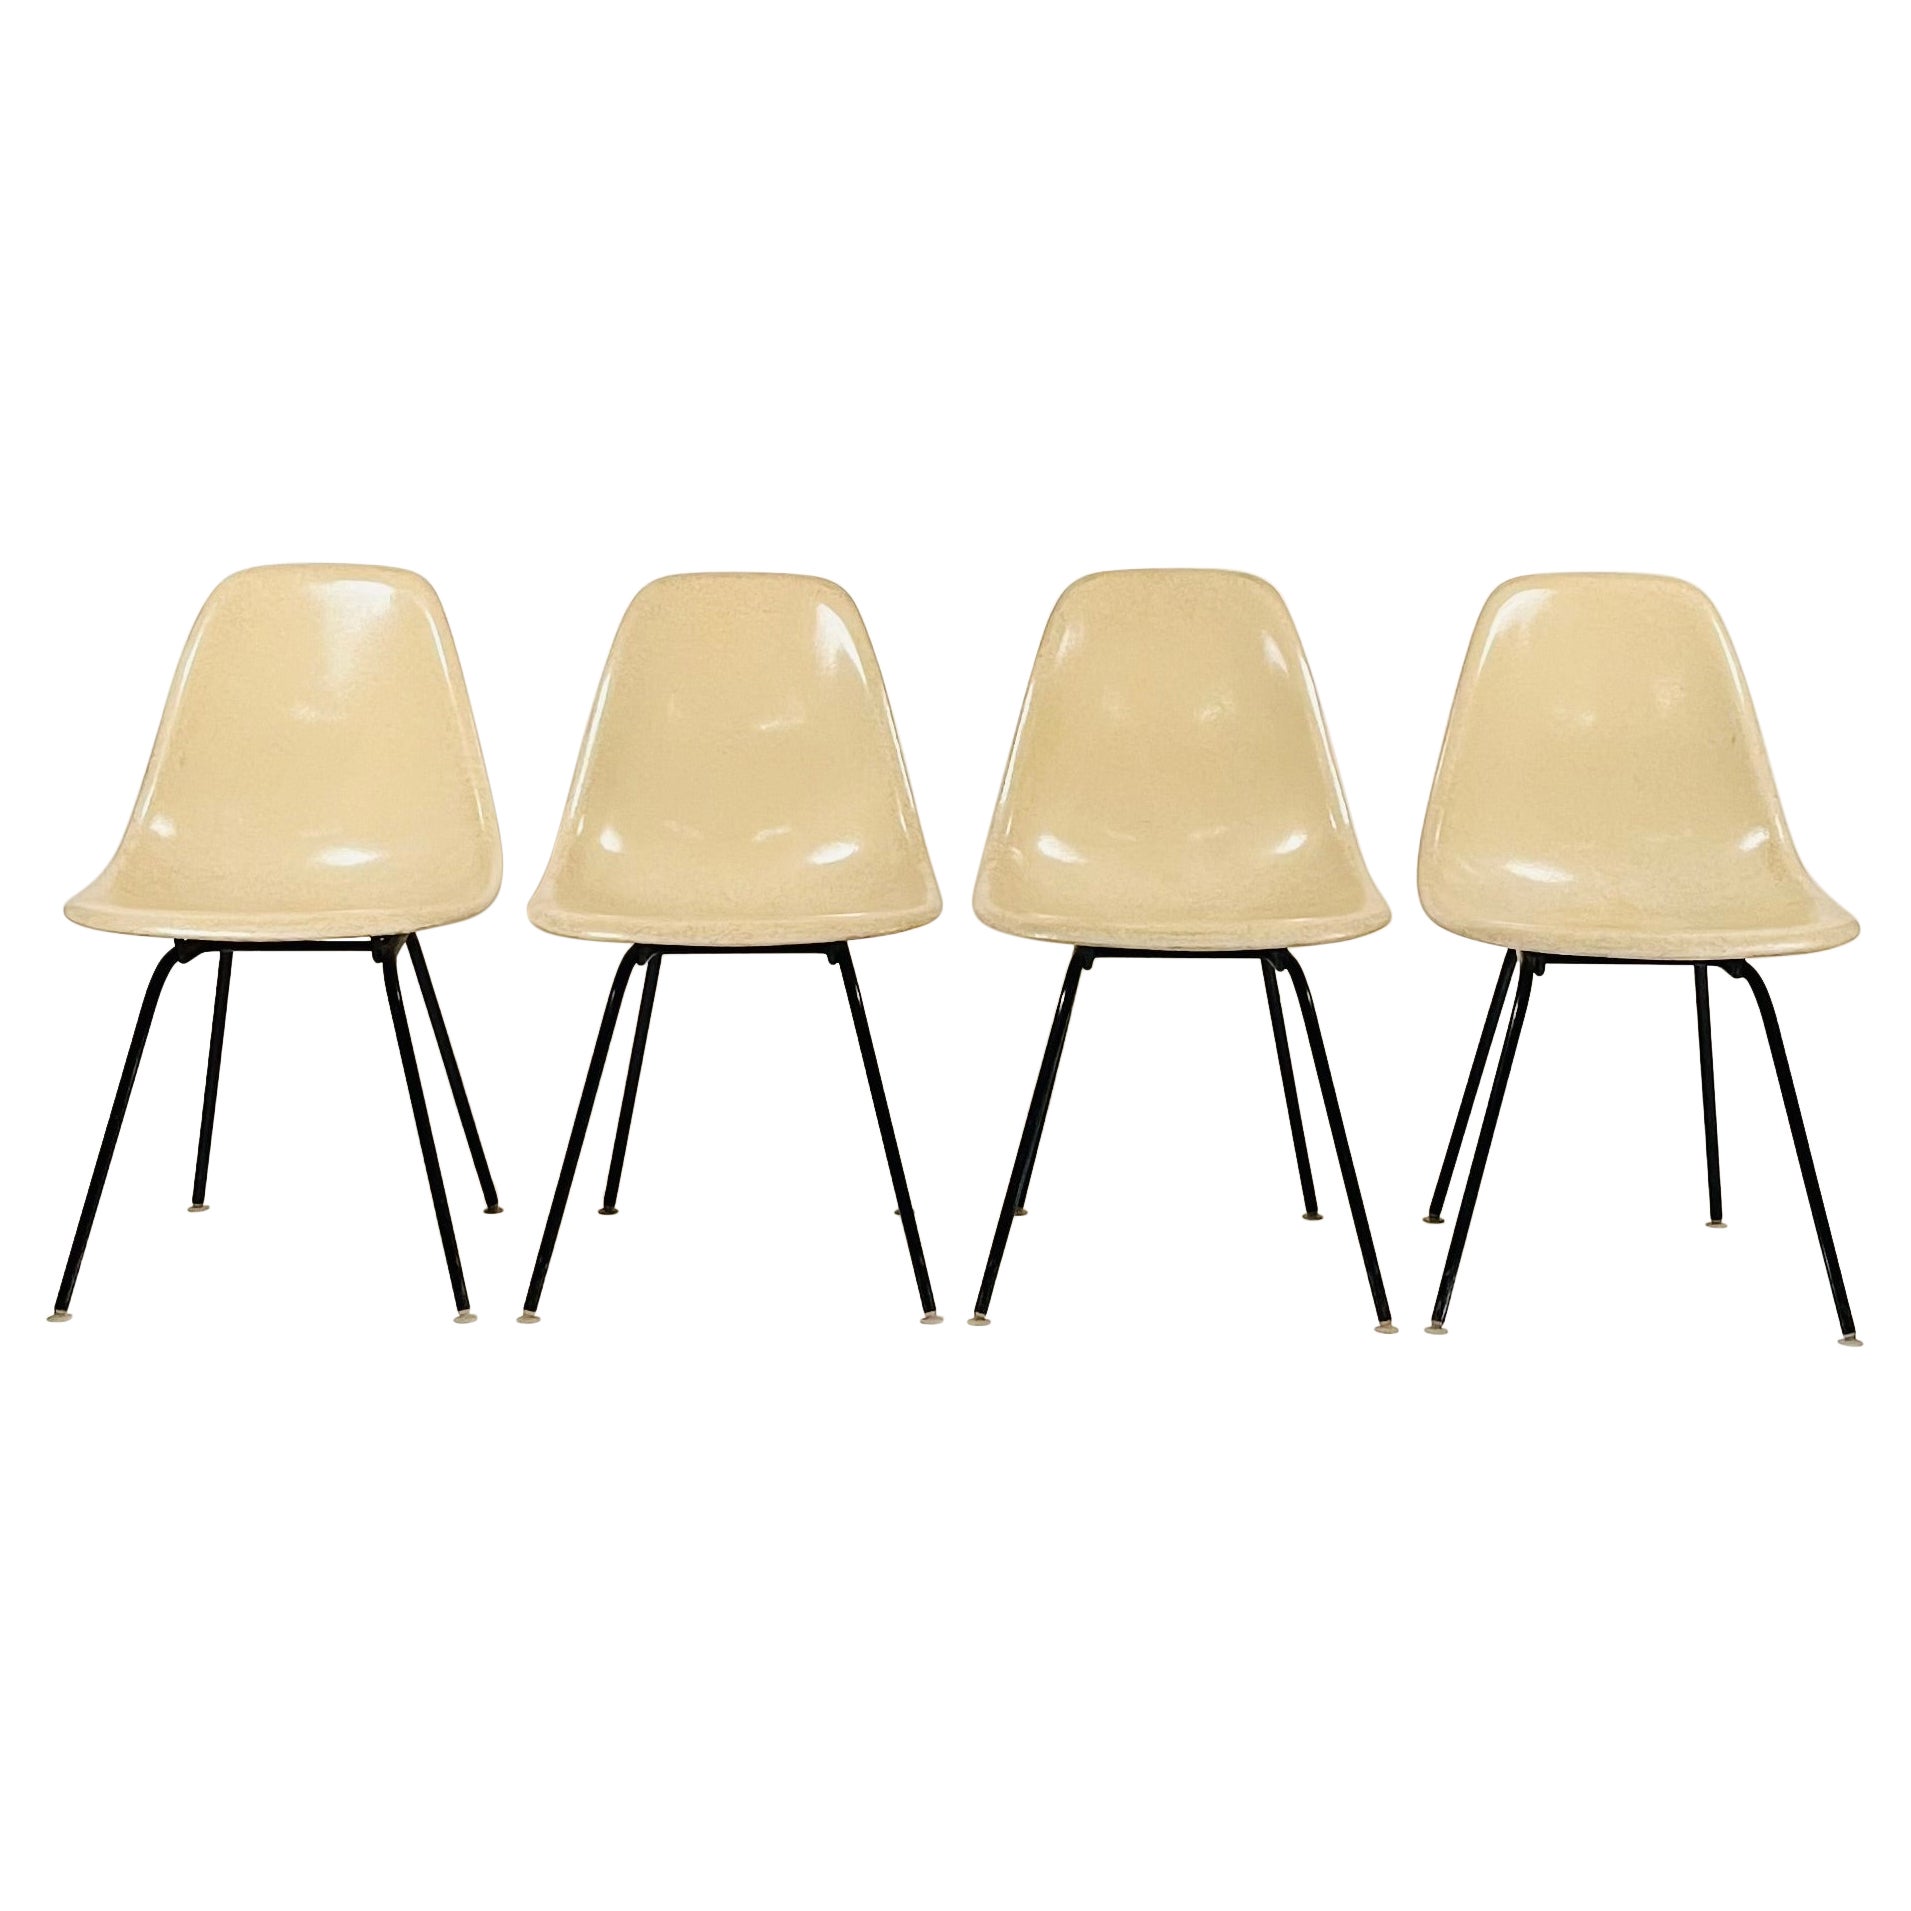 Set of 4 Vintage White Fiberglass Eames Chairs by Herman Miller